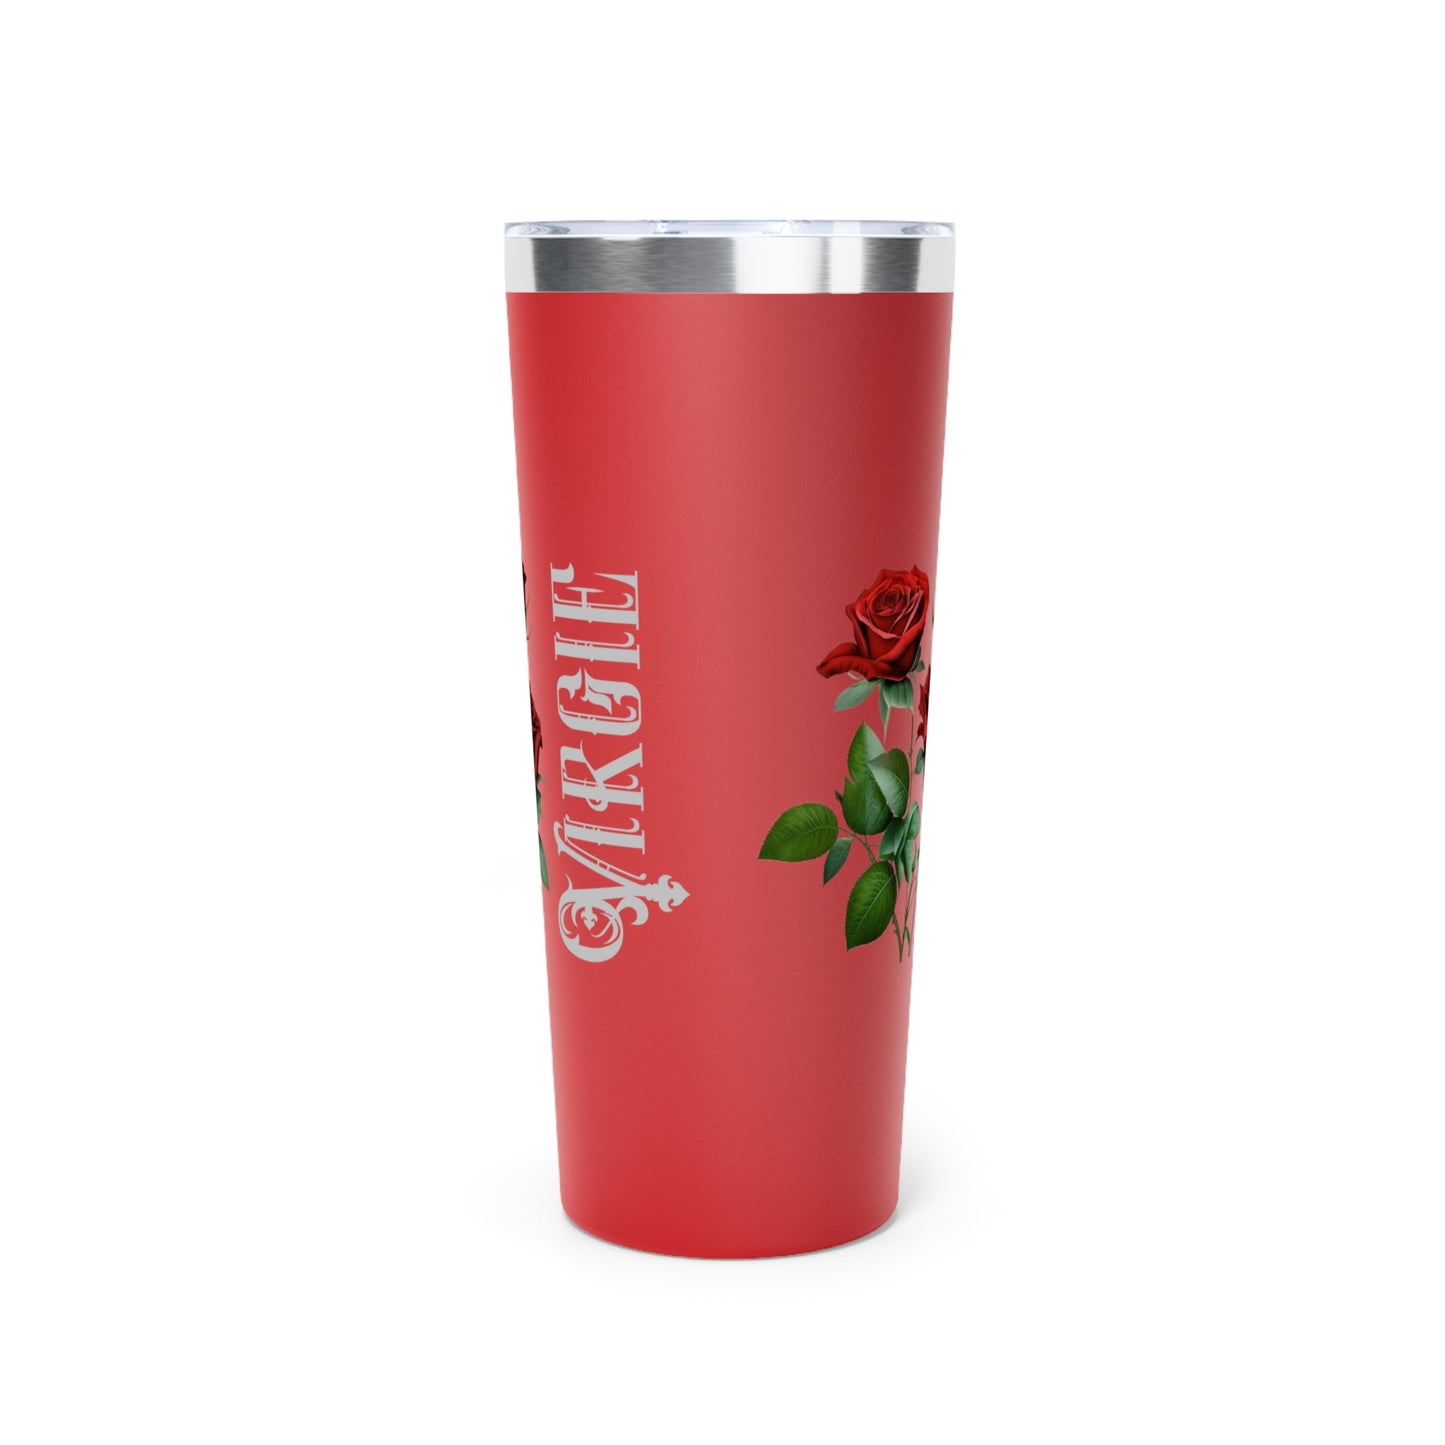 June Personalized Birth Flower Tumbler, Personalized Birth Flower Coffee Cup With Name, Gifts for Her, Bridesmaid Proposal, Party Favor